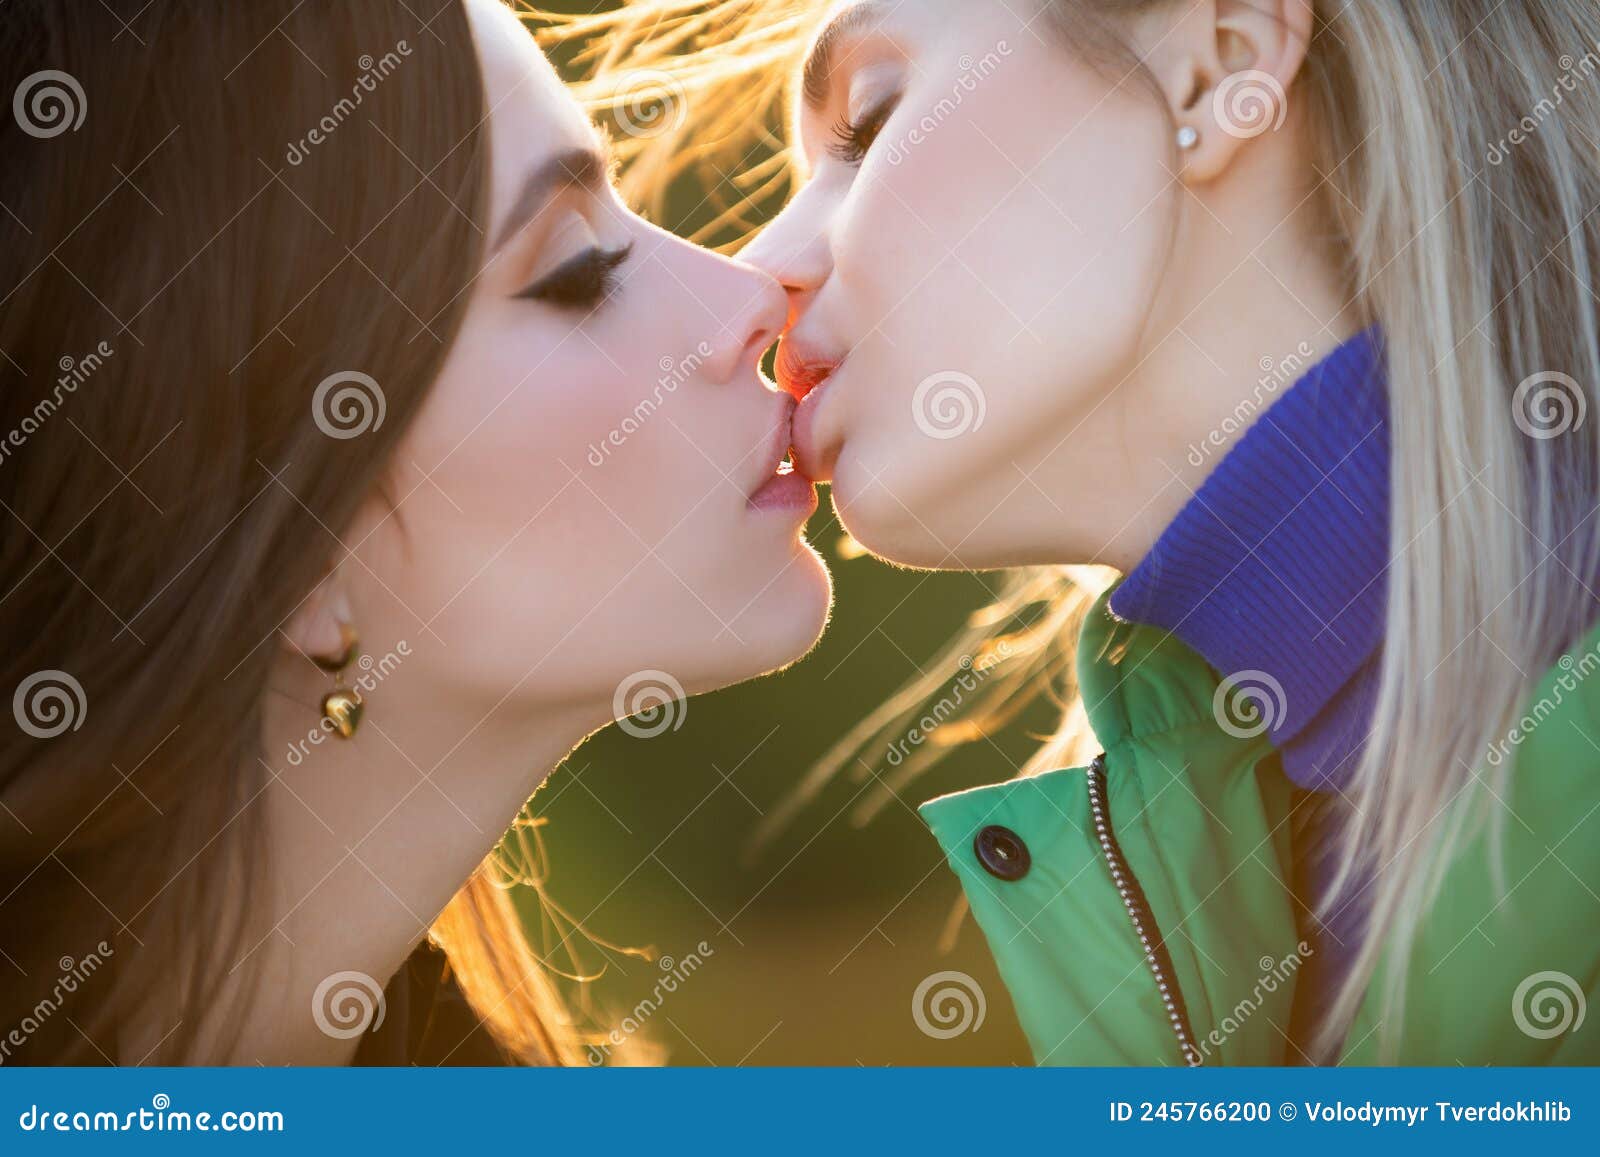 Two Girls Makeout